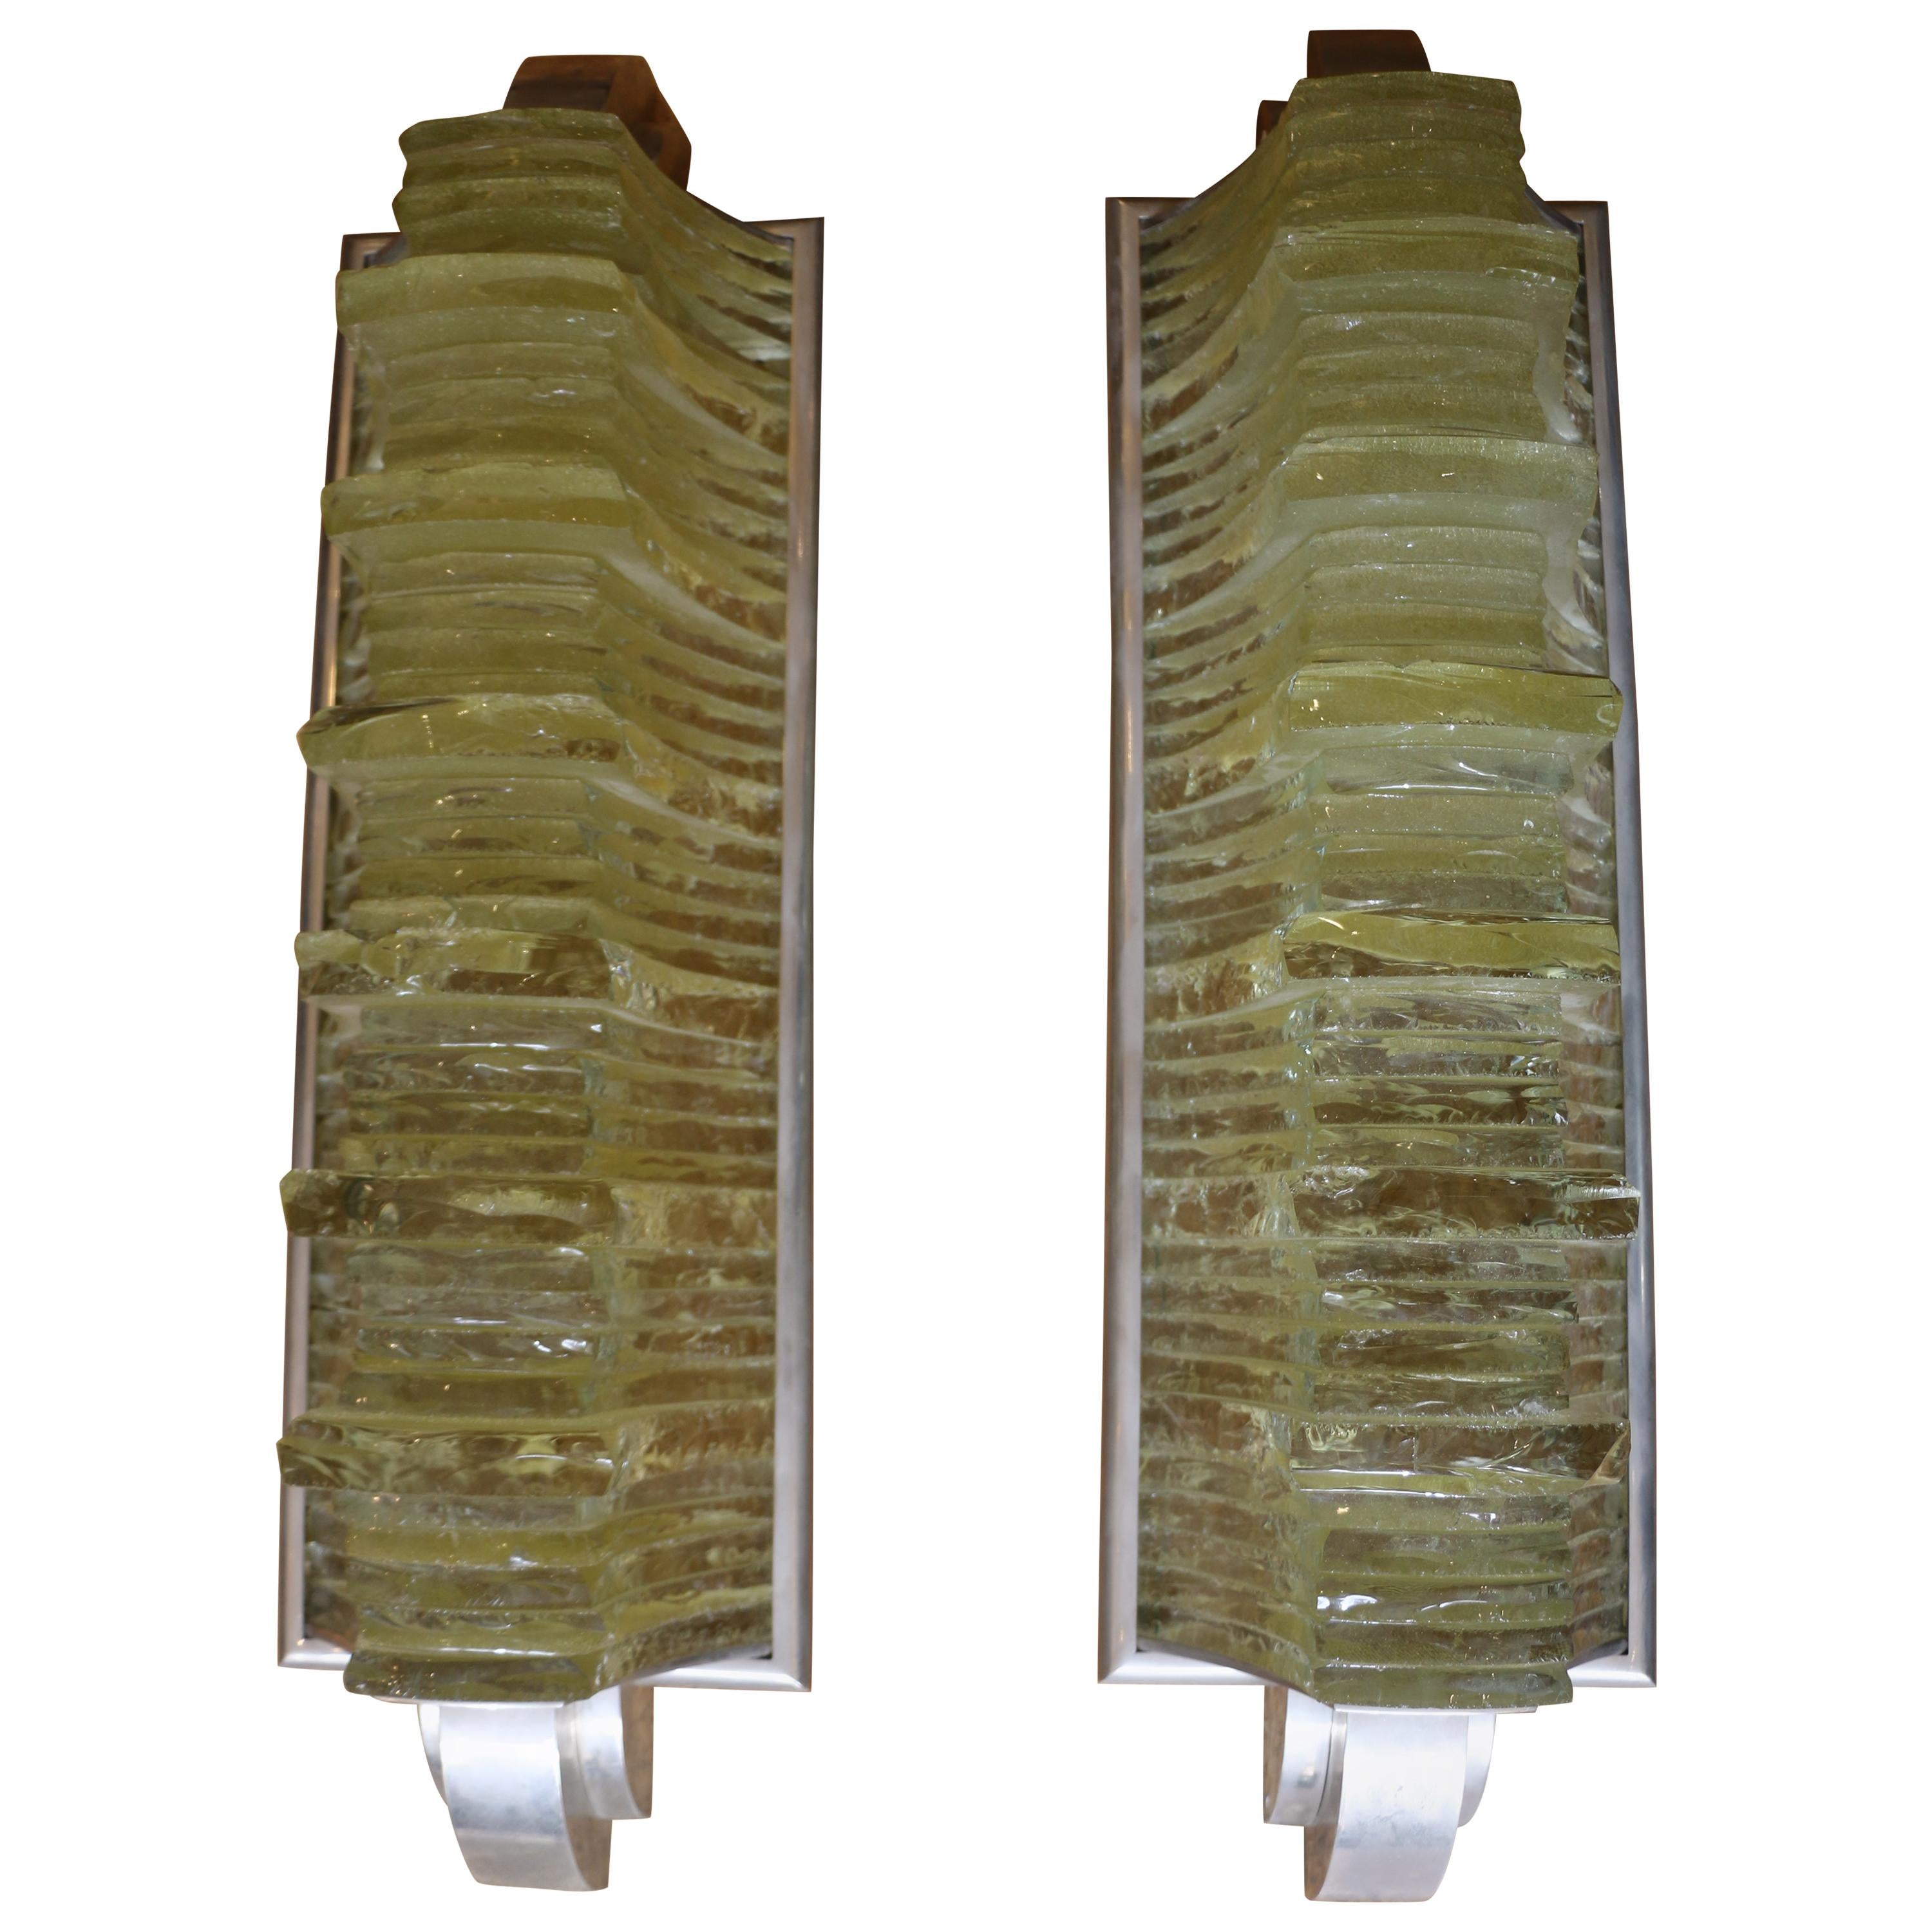 Spectacular Modernist Pair of Sconces by Jean Perzel, France, Art Deco Style